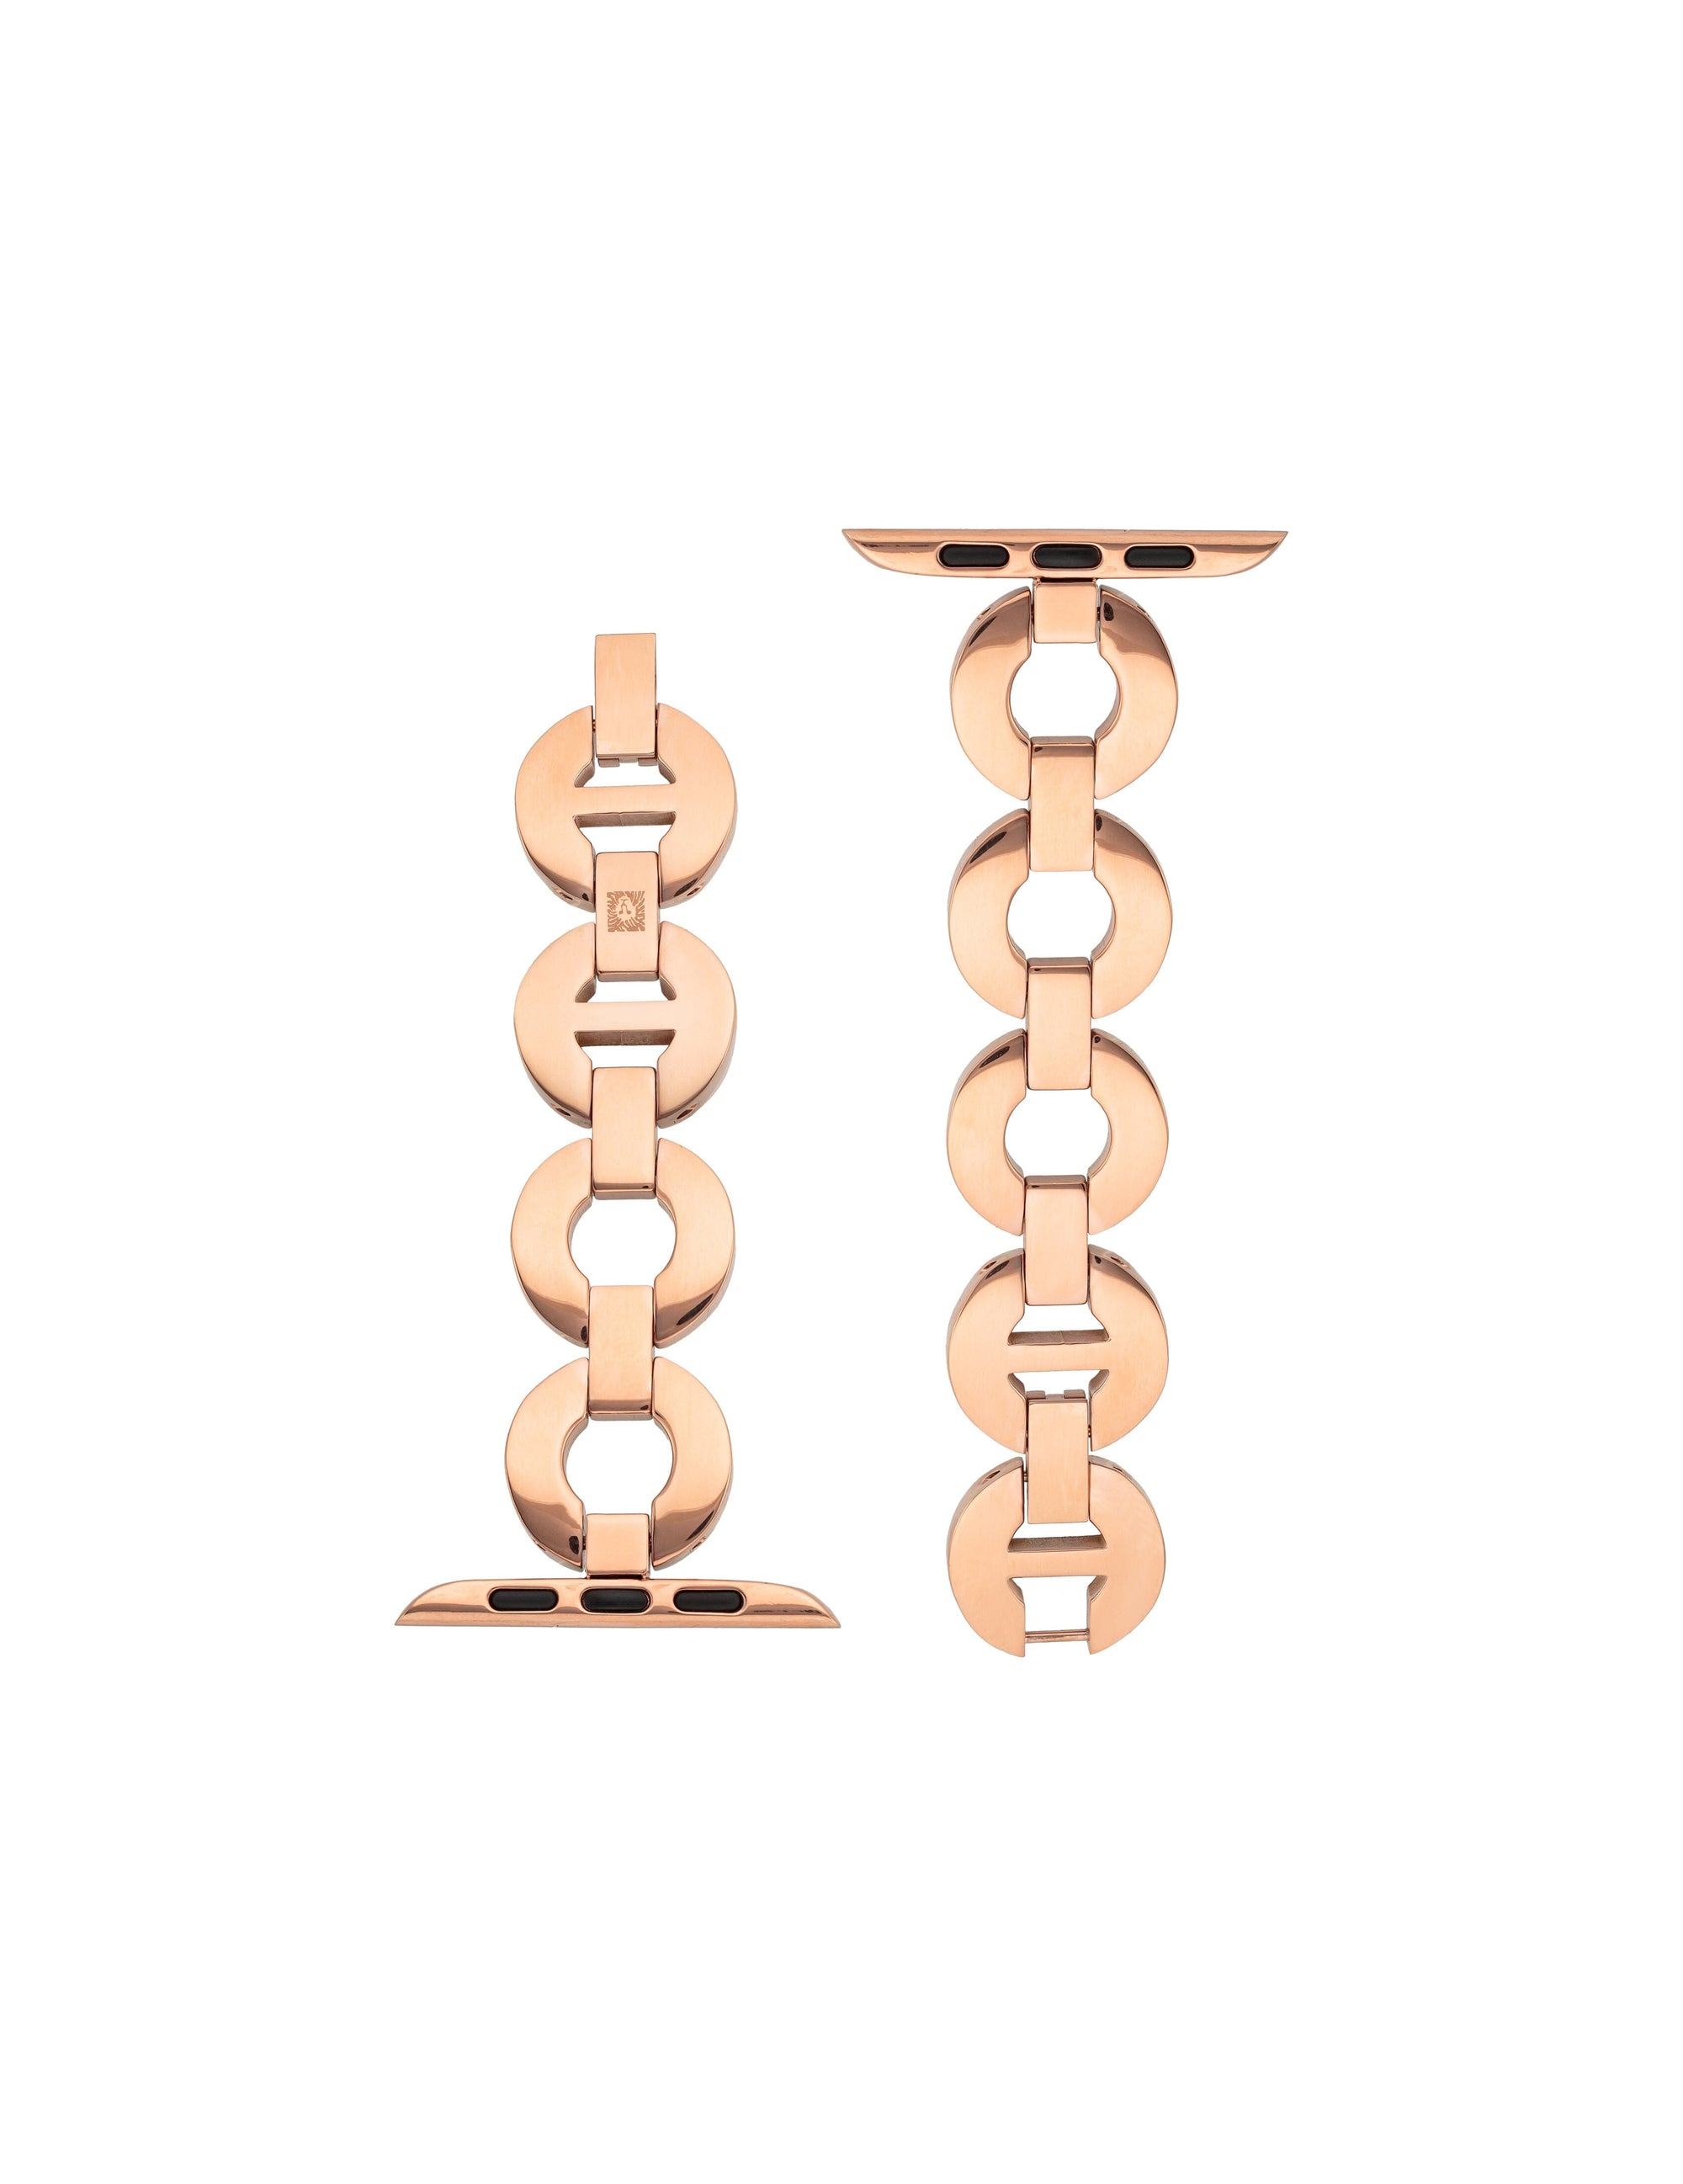 Anne Klein Rose Gold-Tone Round Link Bracelet Band for Apple Watch®